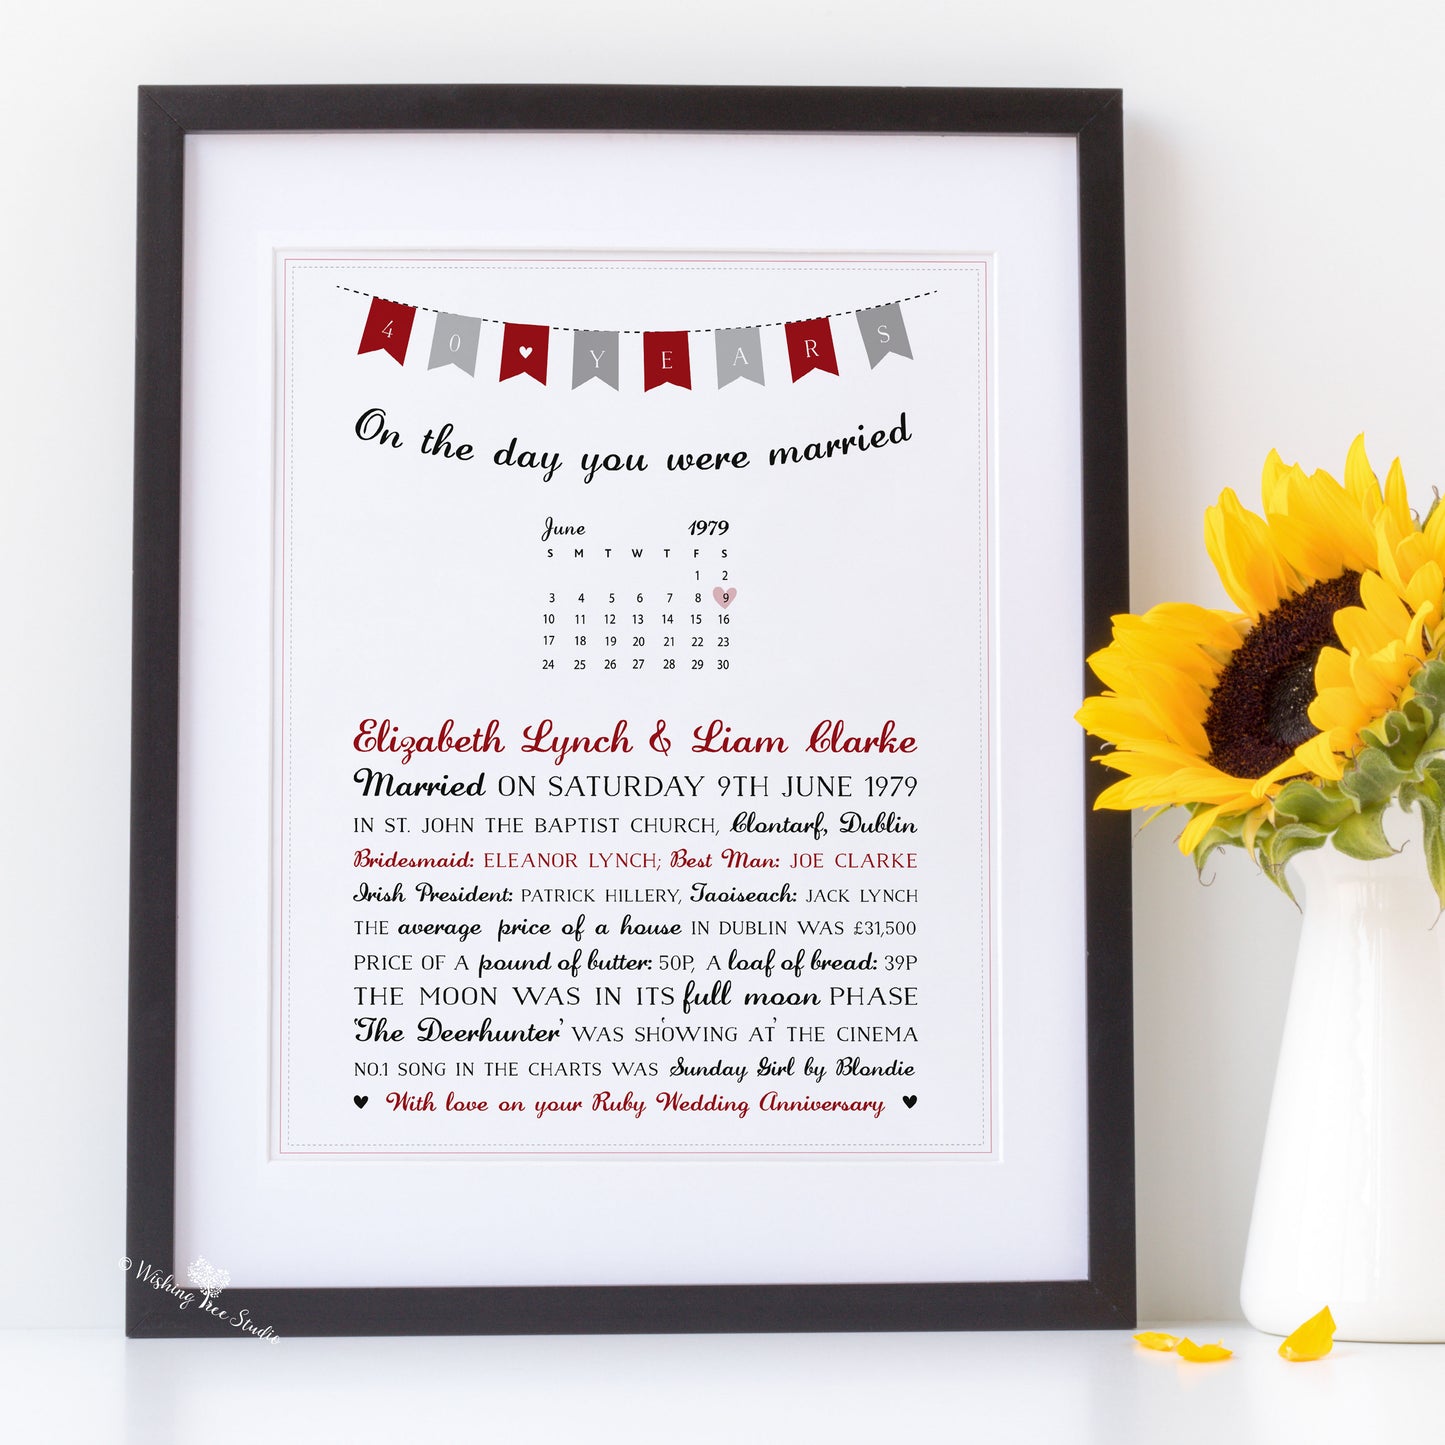 On the Day you were Married framed print